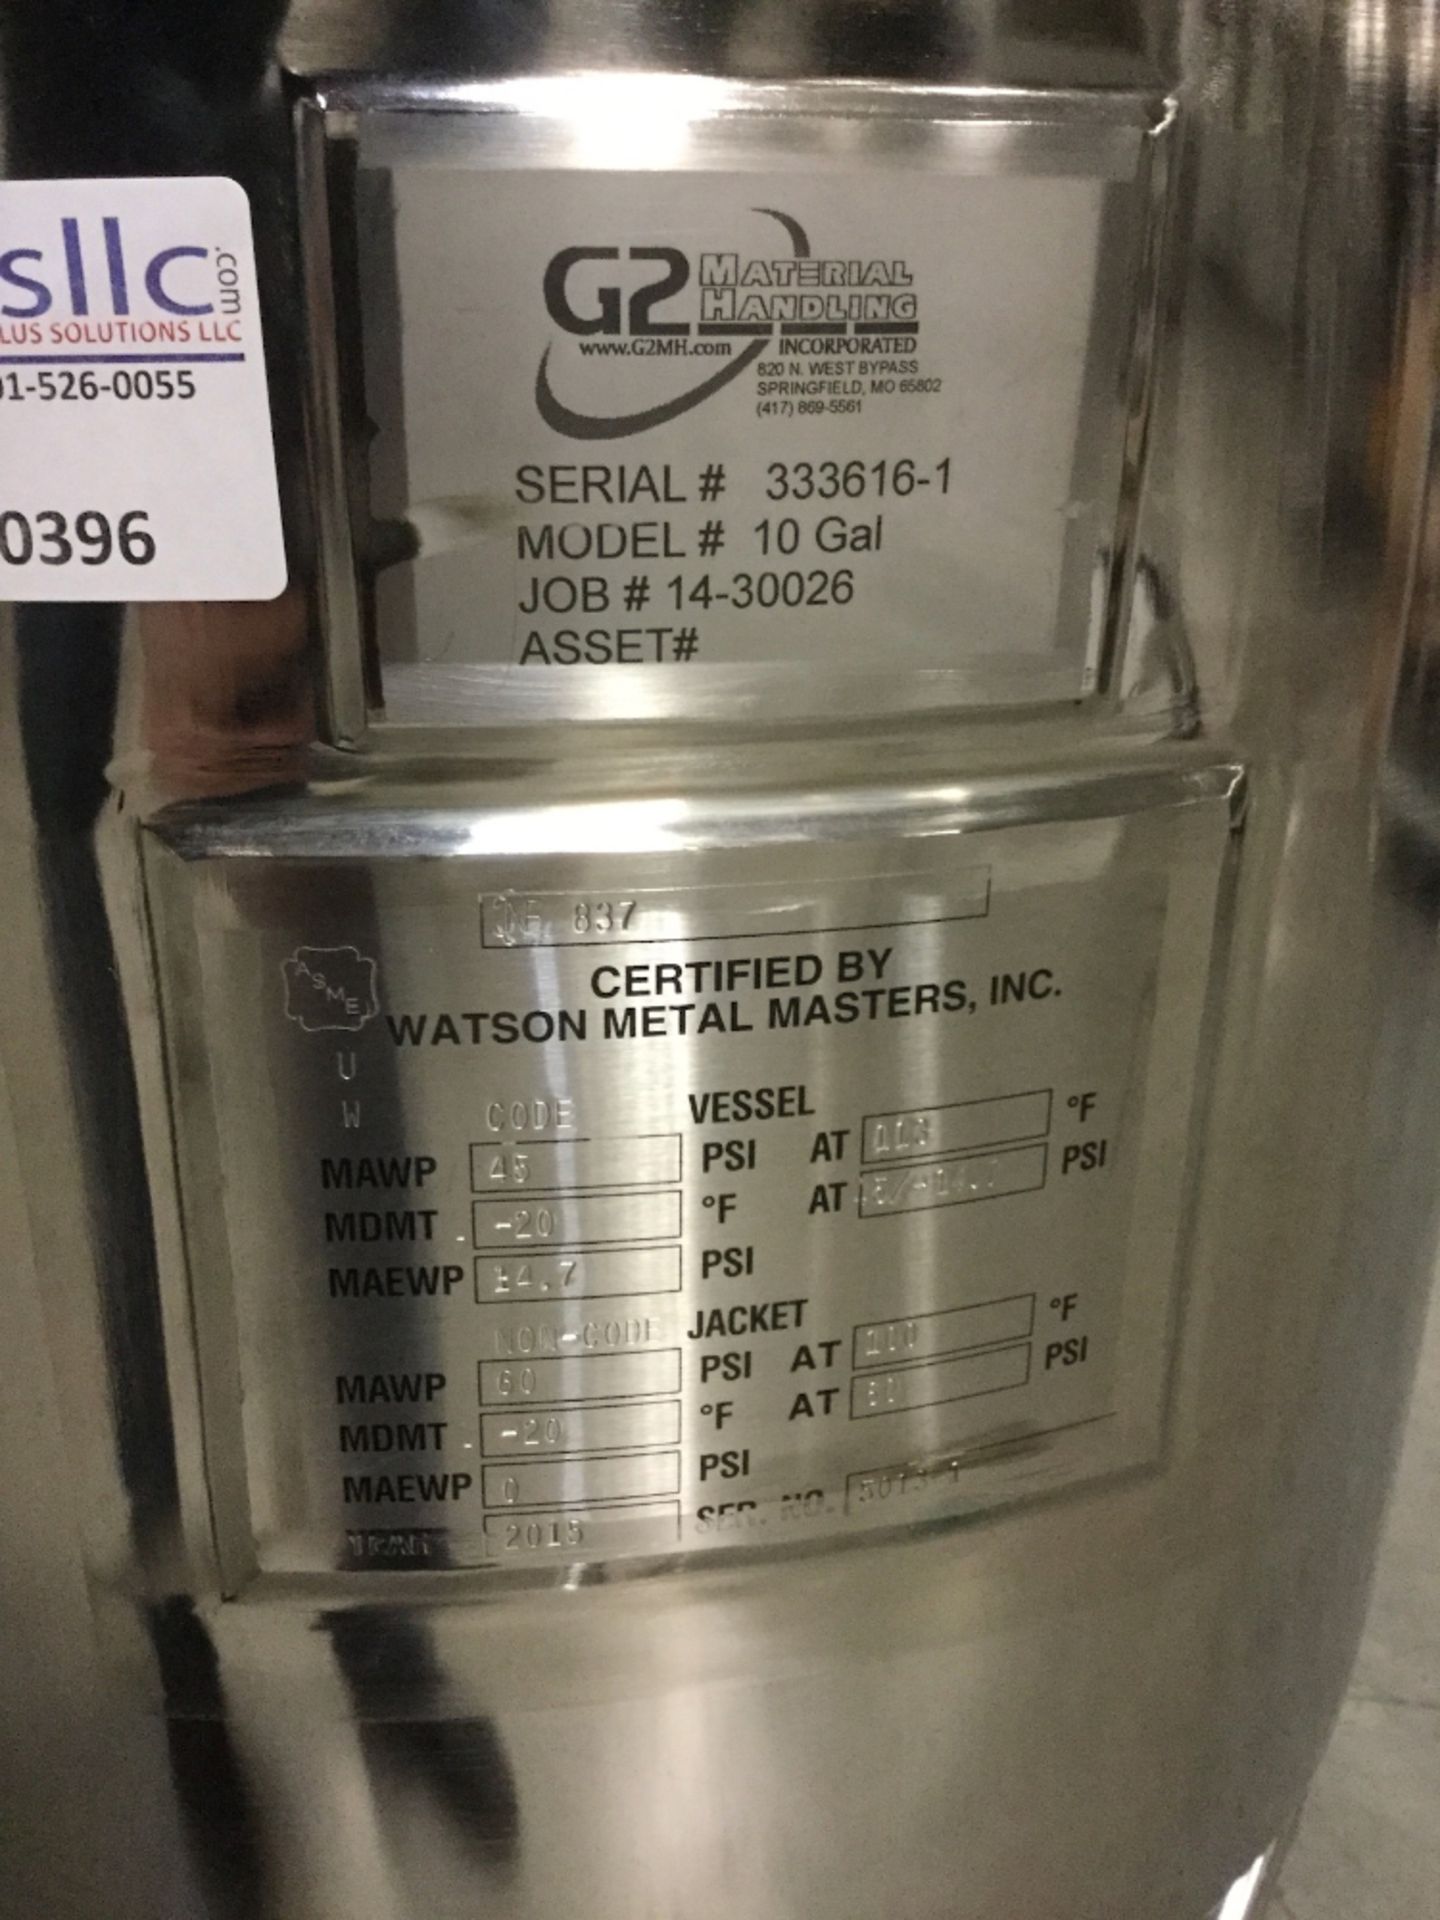 G2 Material Handling 10 Gallon Stainless Steel Vessel - Image 2 of 3